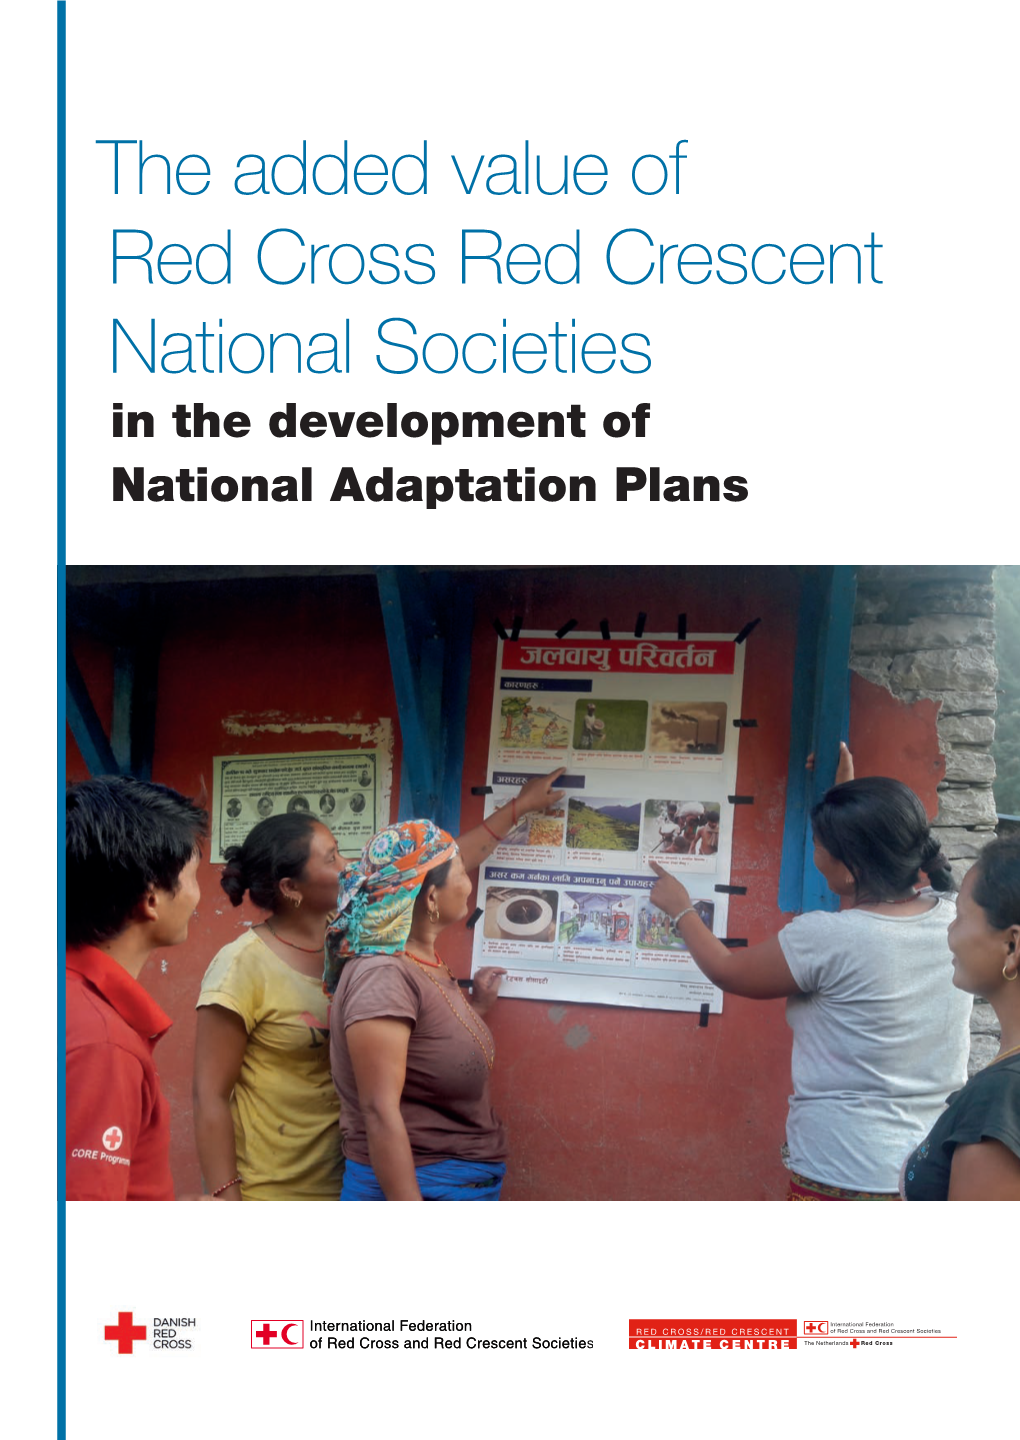 The Added Value of Red Cross Red Crescent National Societies in the Development of National Adaptation Plans